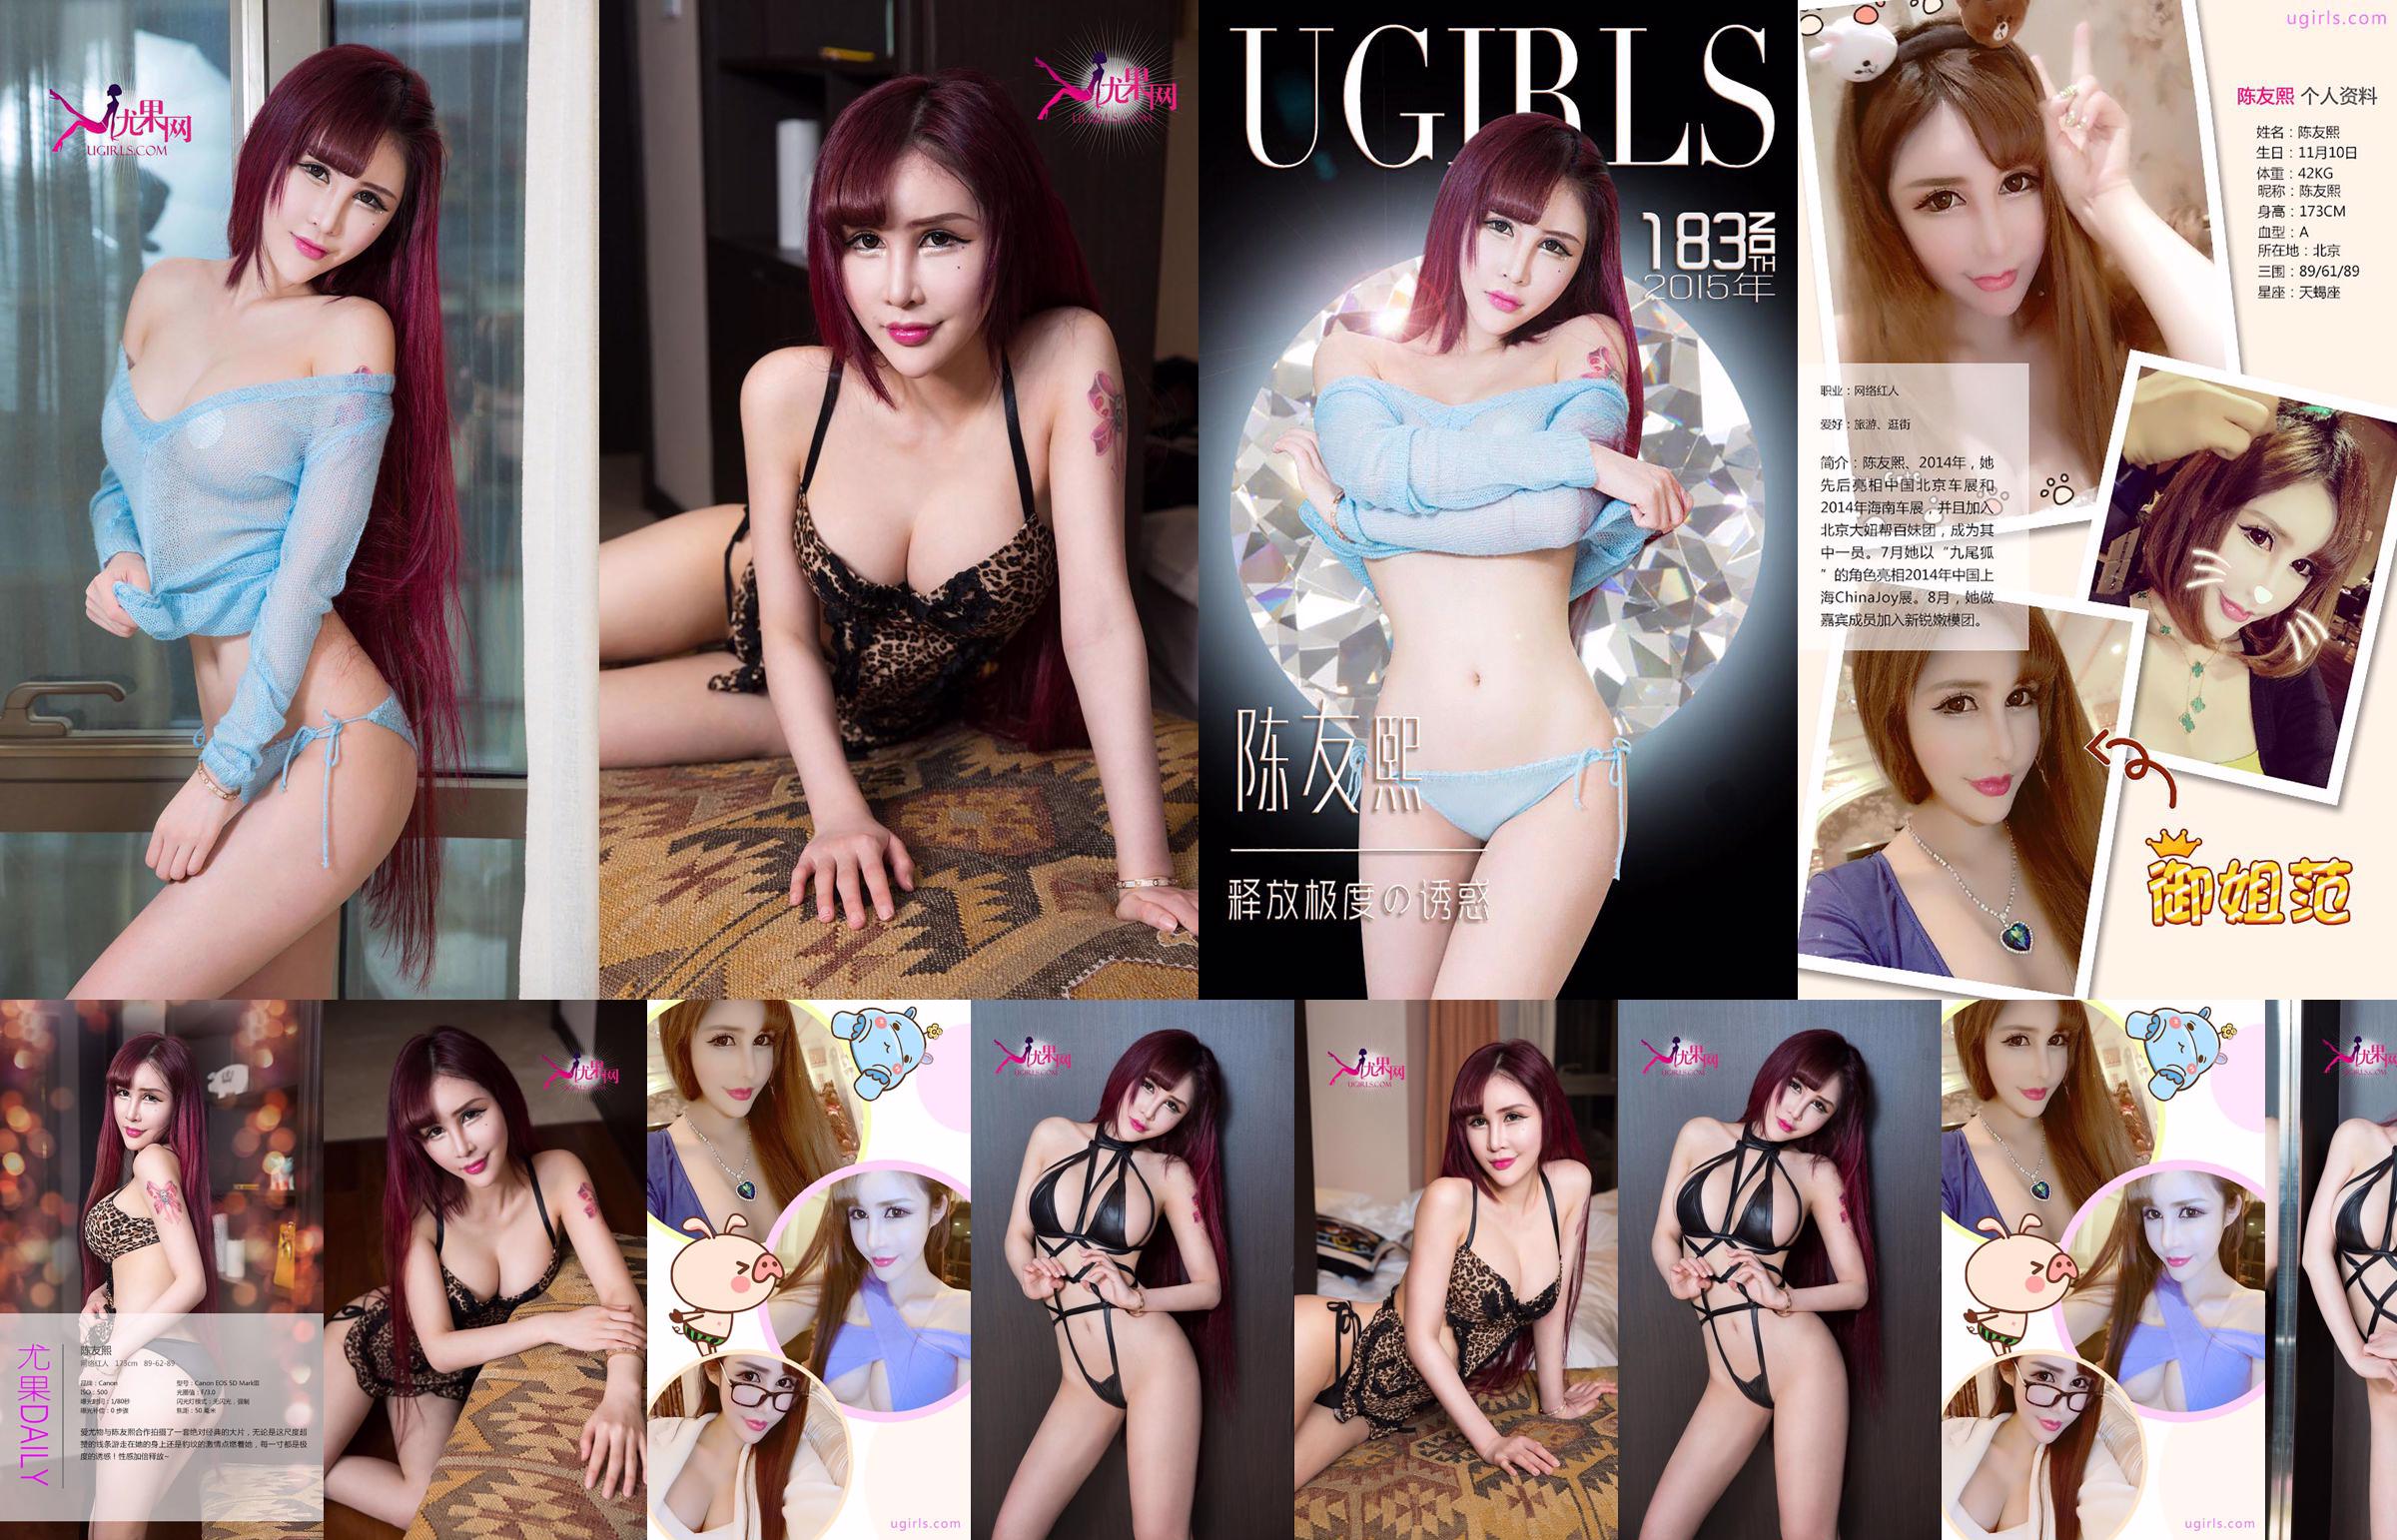 Chen Youxi "Release the Temptation of Jealousy" [爱优物Ugirls] No.183 No.f466dc Page 1